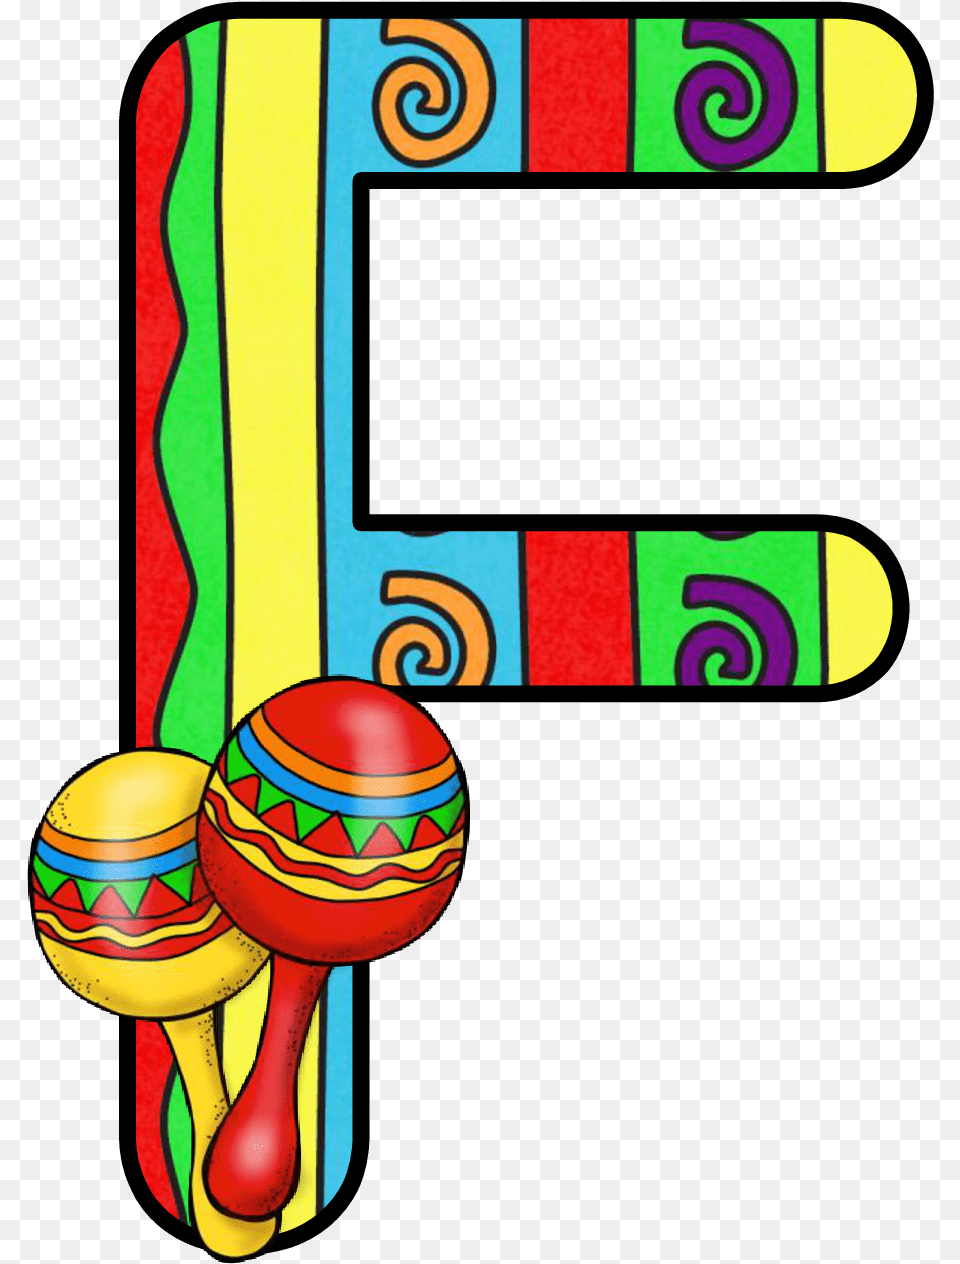 Ch B Alfabeto May 5 Th De Kid Sparkz Fiesta Clipart Letters, Text, Maraca, Musical Instrument Png Image